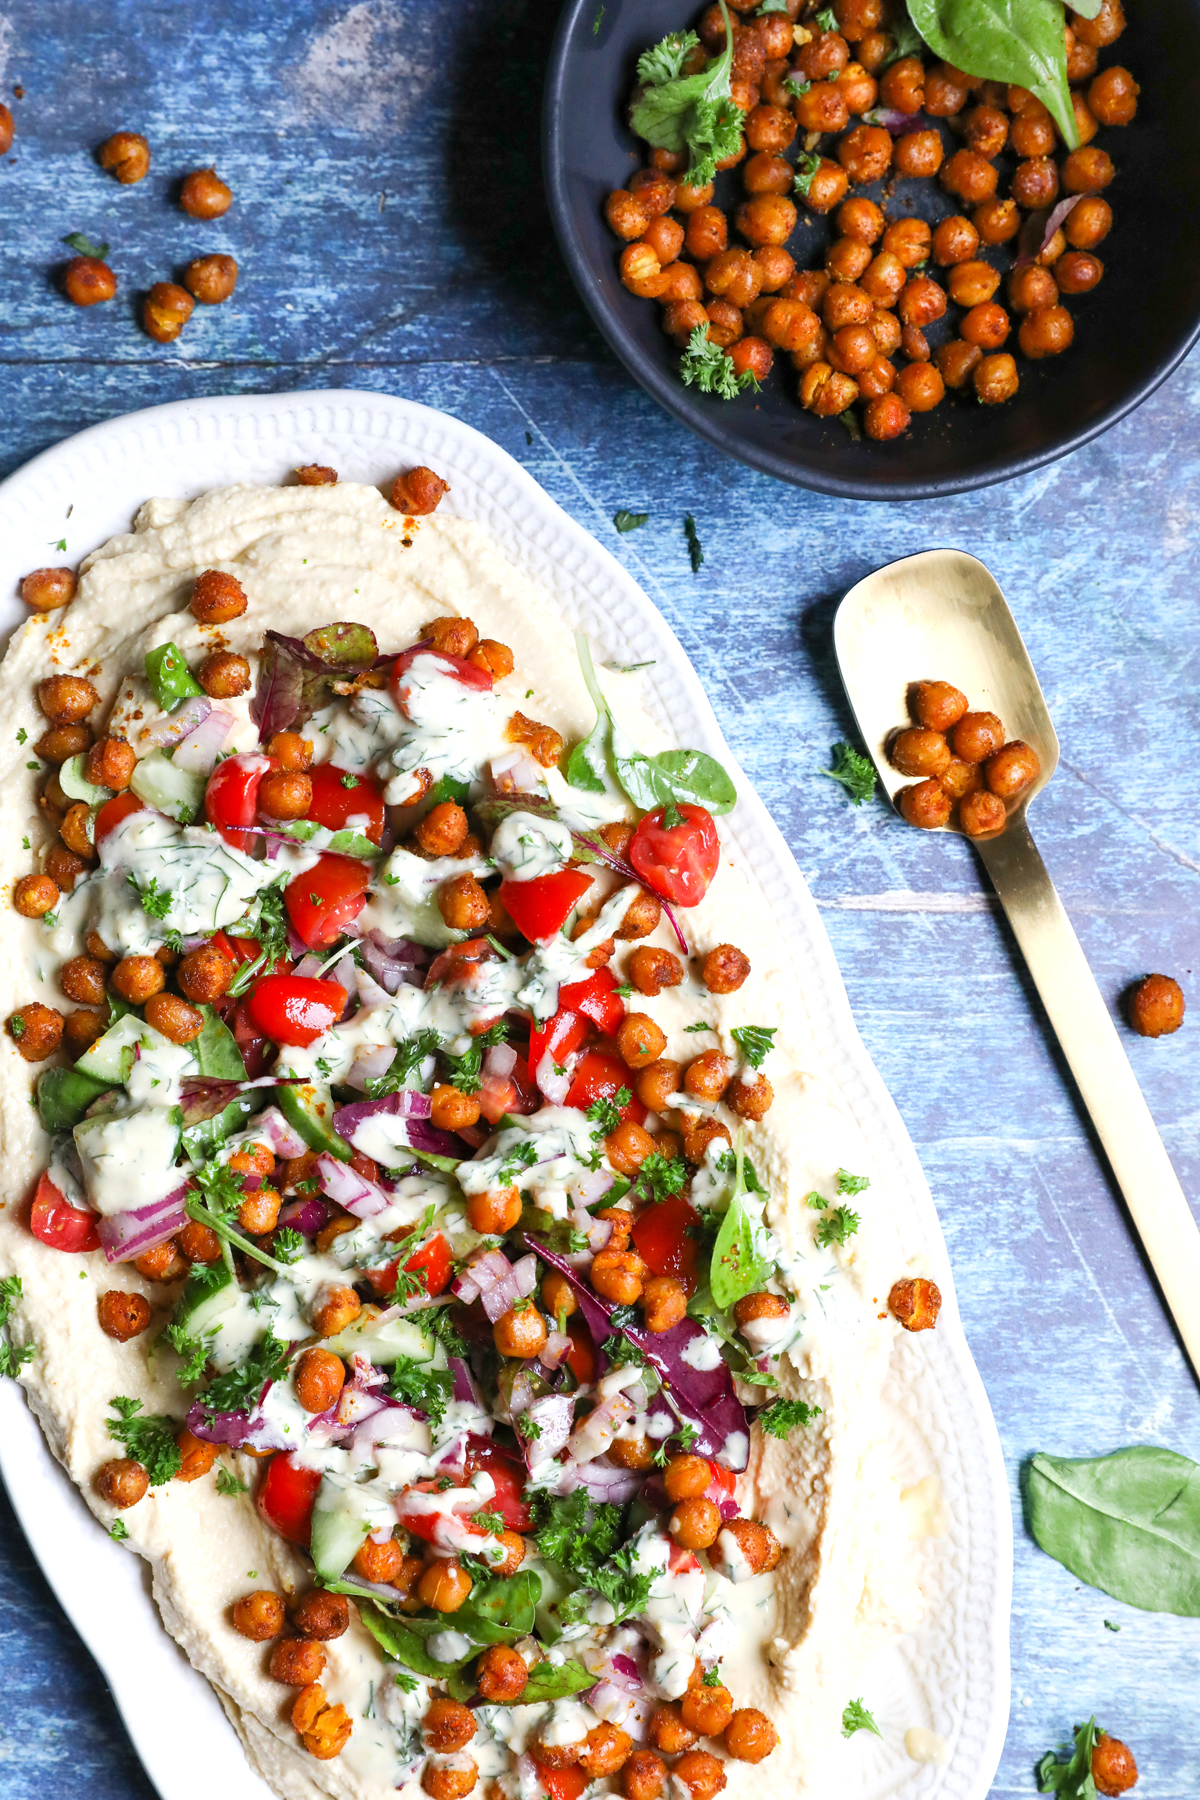 Hummus and Chickpea Salad with Vegan Dressing